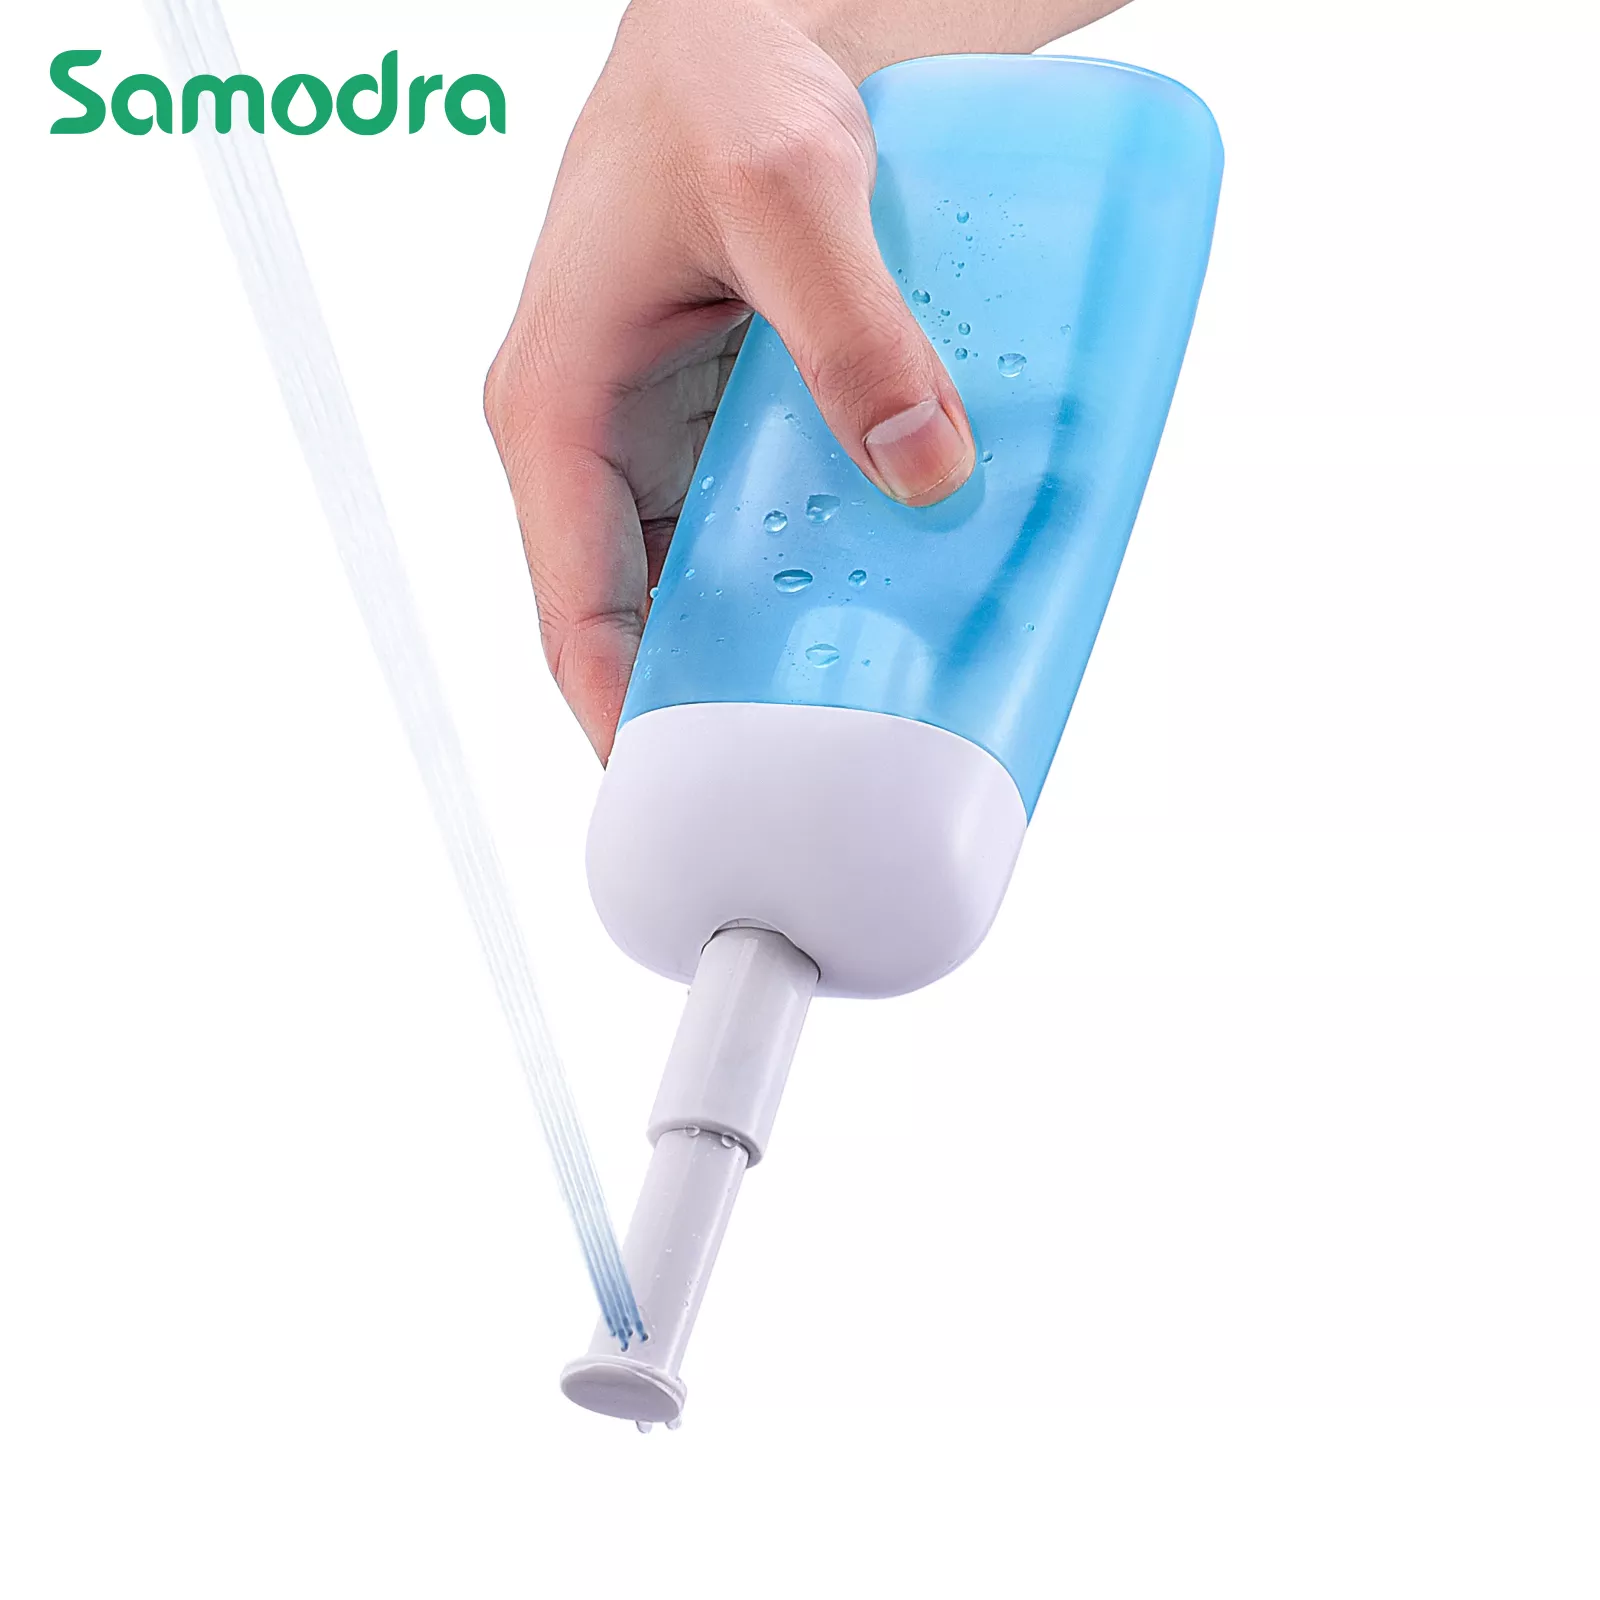 Portable Bidet - Travel Handheld Bidet Bottle with Retractable Spray Nozzle for Hygiene Cleansing Personal Care 350ml